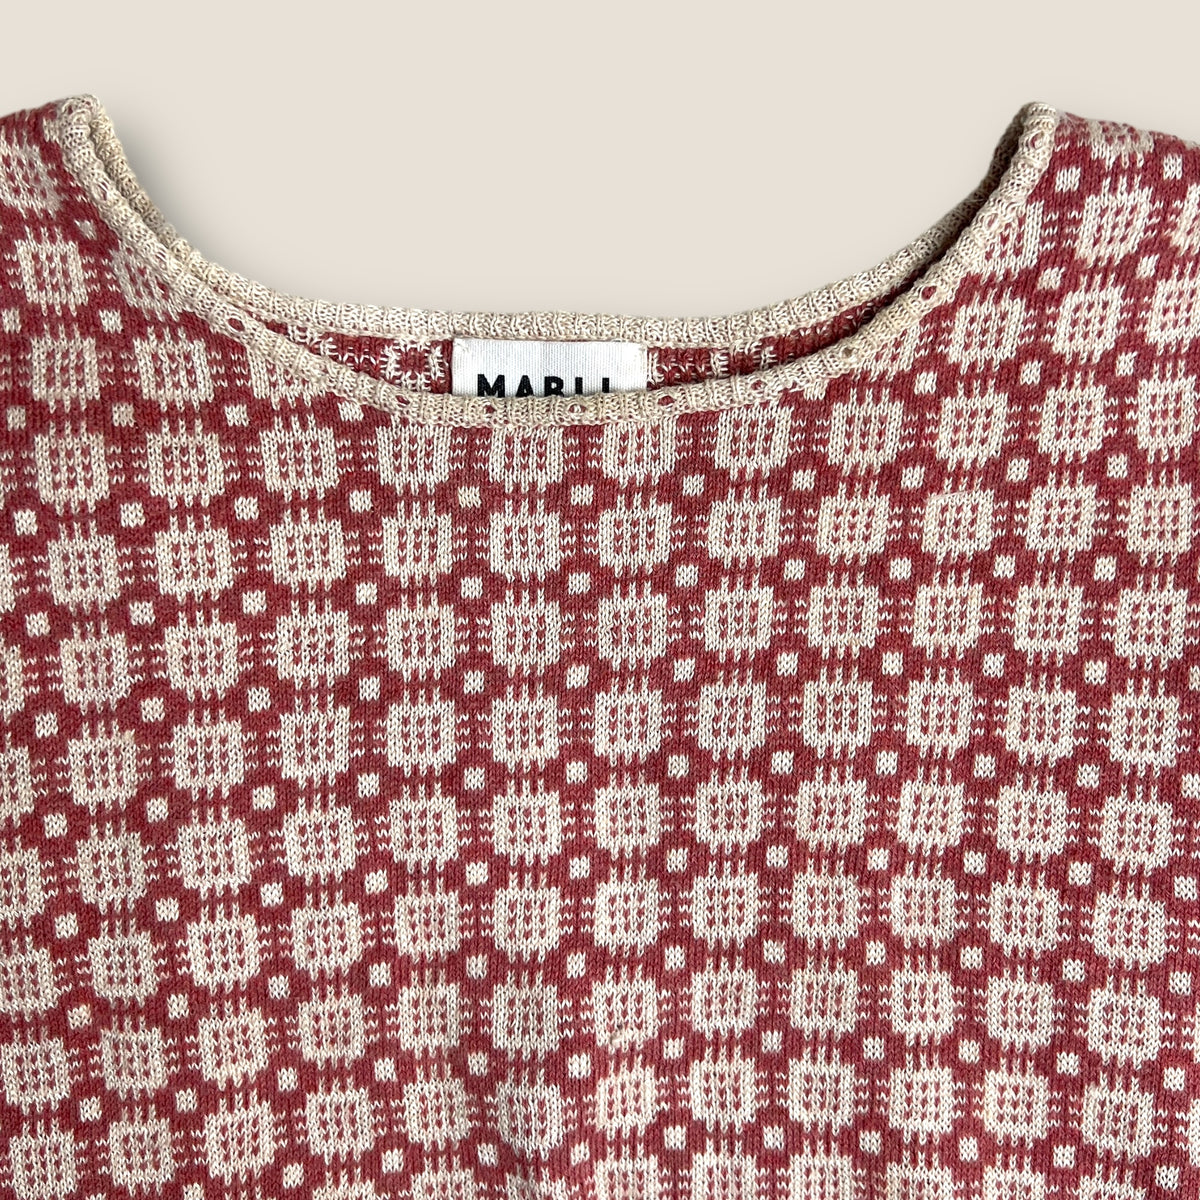 Mabli Cotton / Linen Knit Top size 6 years